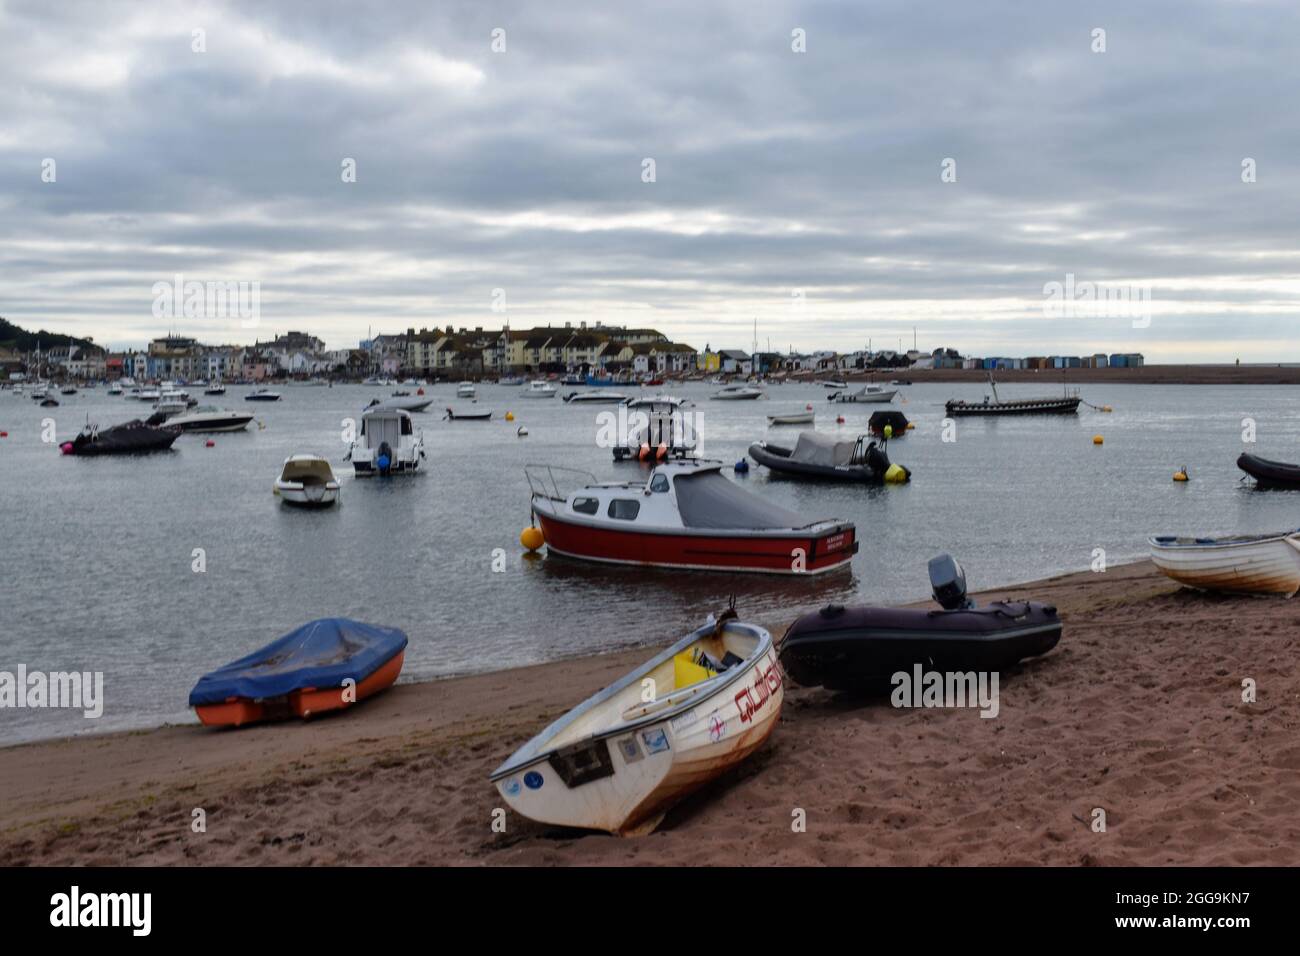 Shaldon Beach is littered with boats moored along the foreshore. Shaldon is opposite Teignmouth at the mouth of the Teign Estuary. Stock Photo